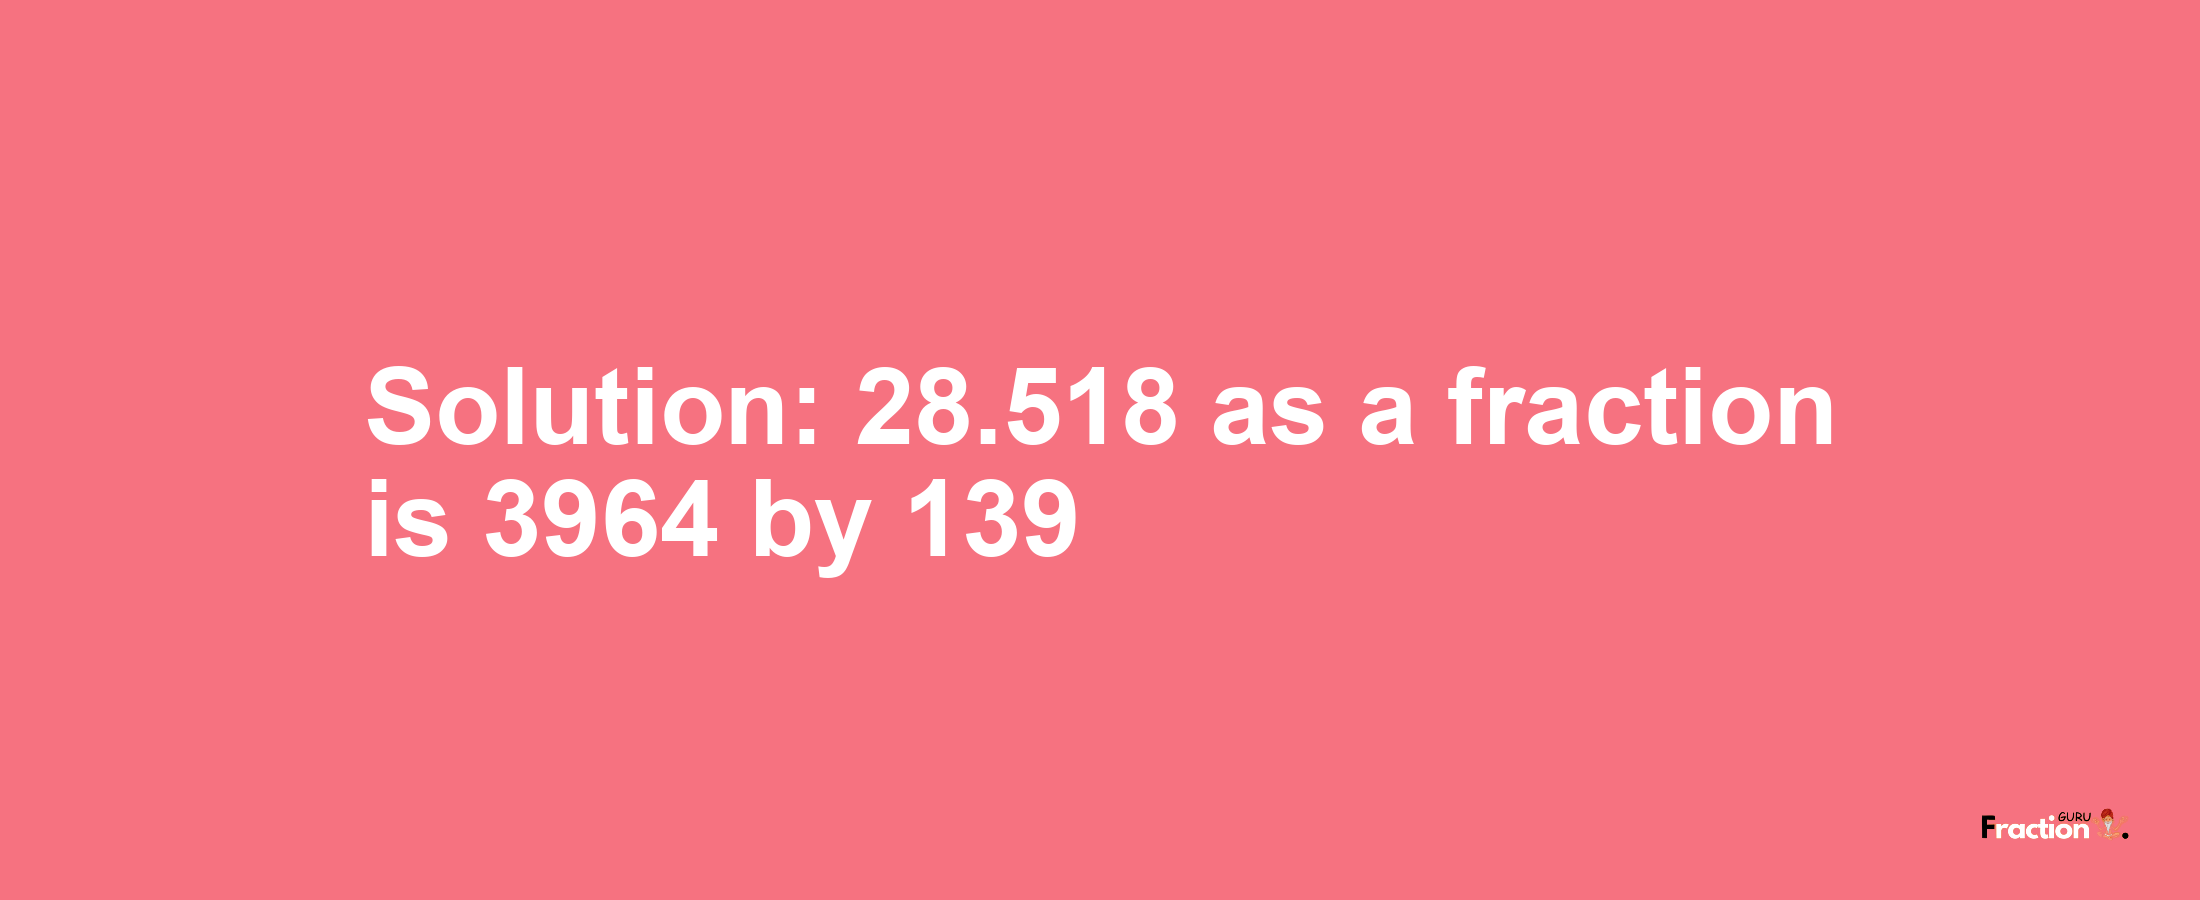 Solution:28.518 as a fraction is 3964/139